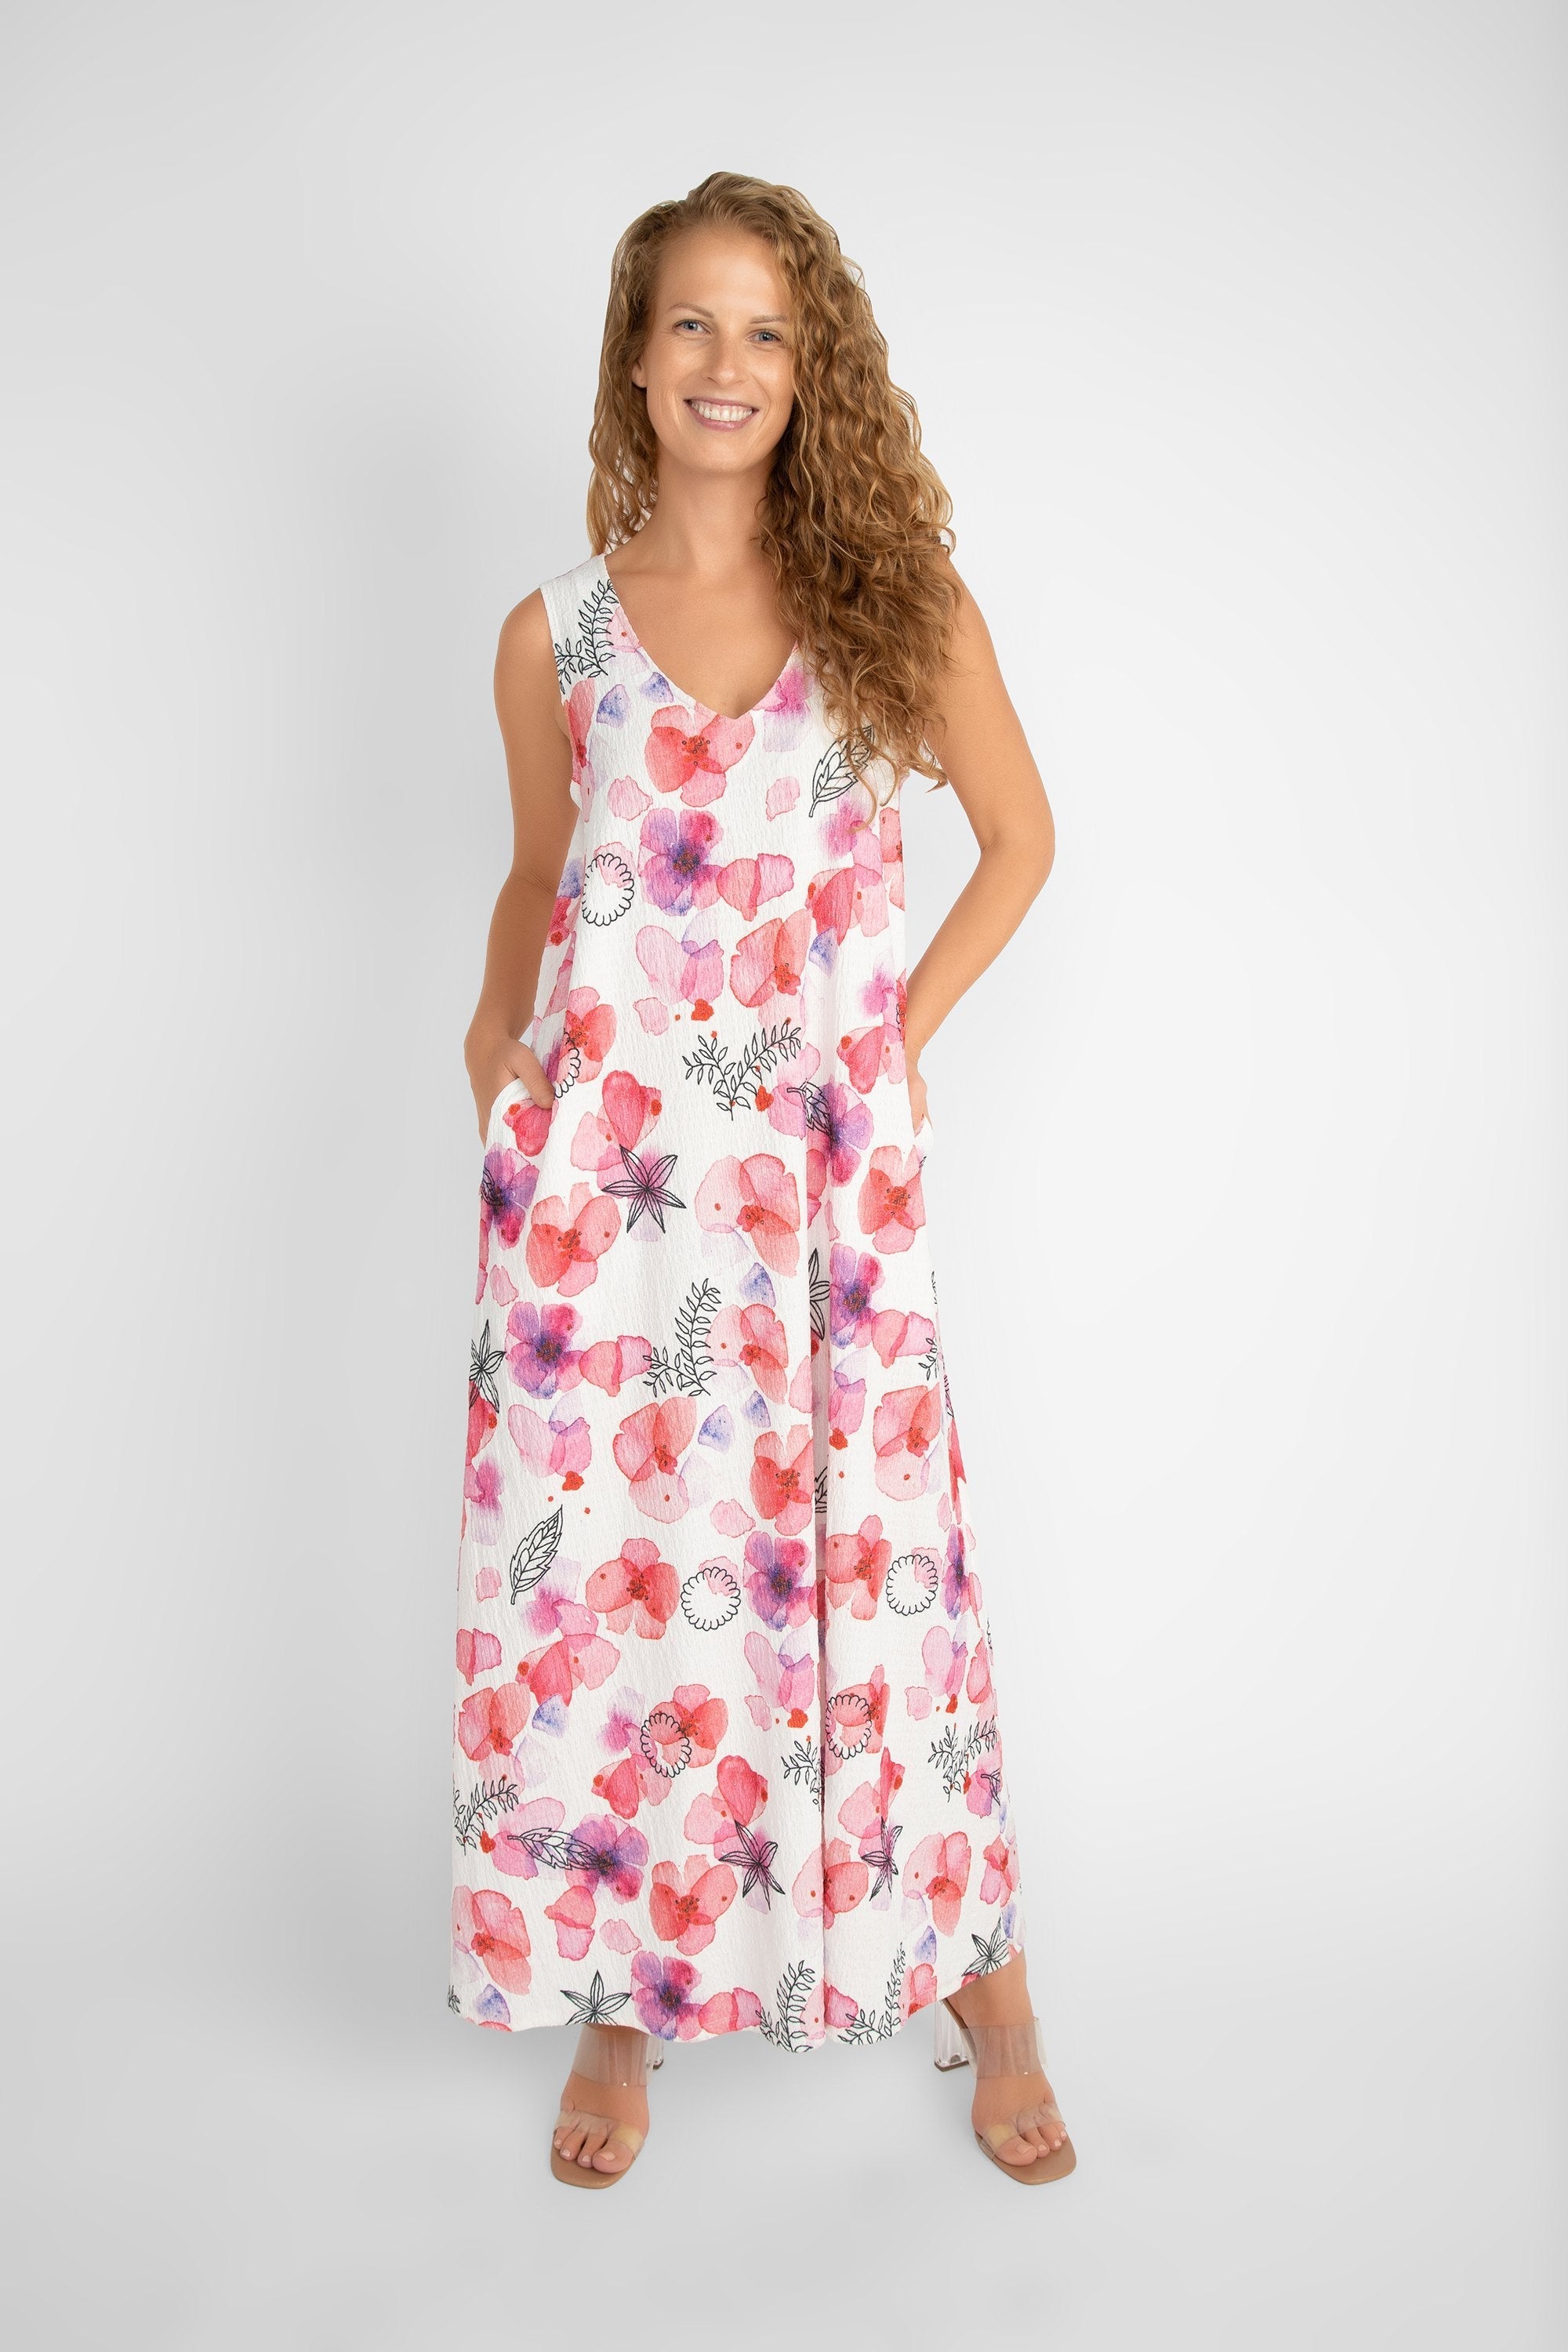 Compli K (33565) Women's Sleeveless V-neck Printed Maxi Dress in a White with Pink Florals and Black Illustrations